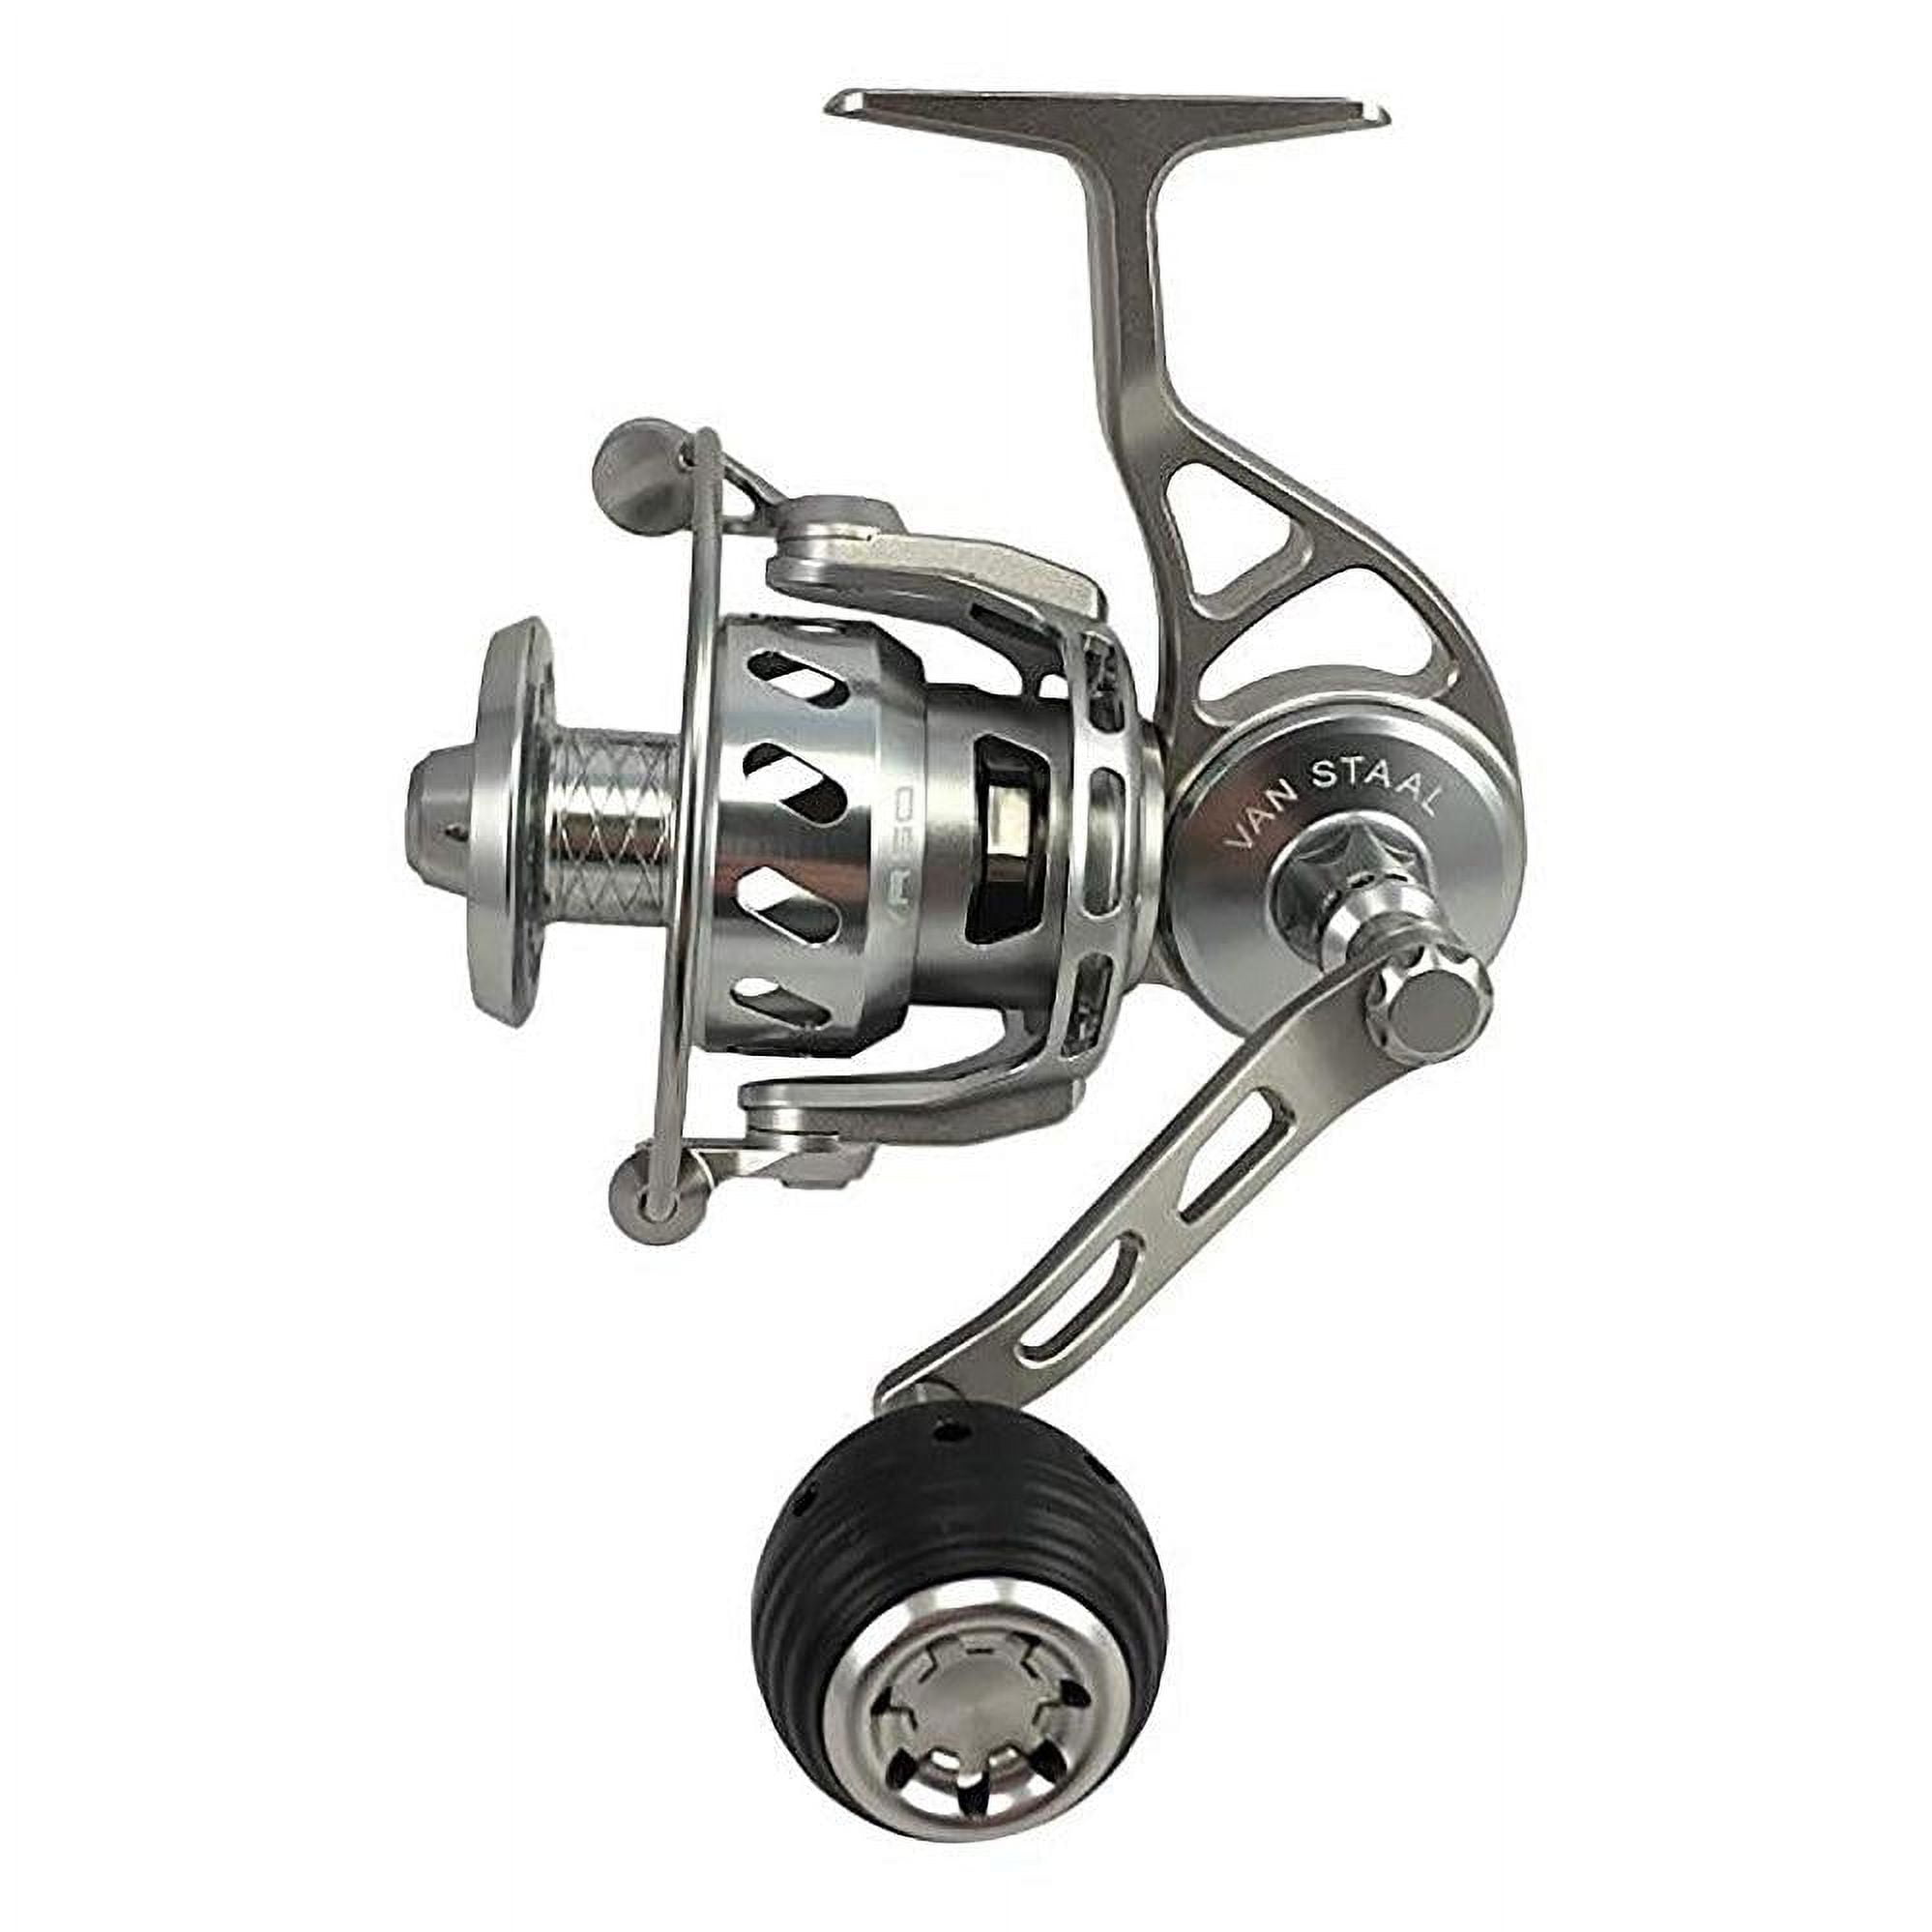 Van Staal VR Spin 125 - Silver Spinning Reel 